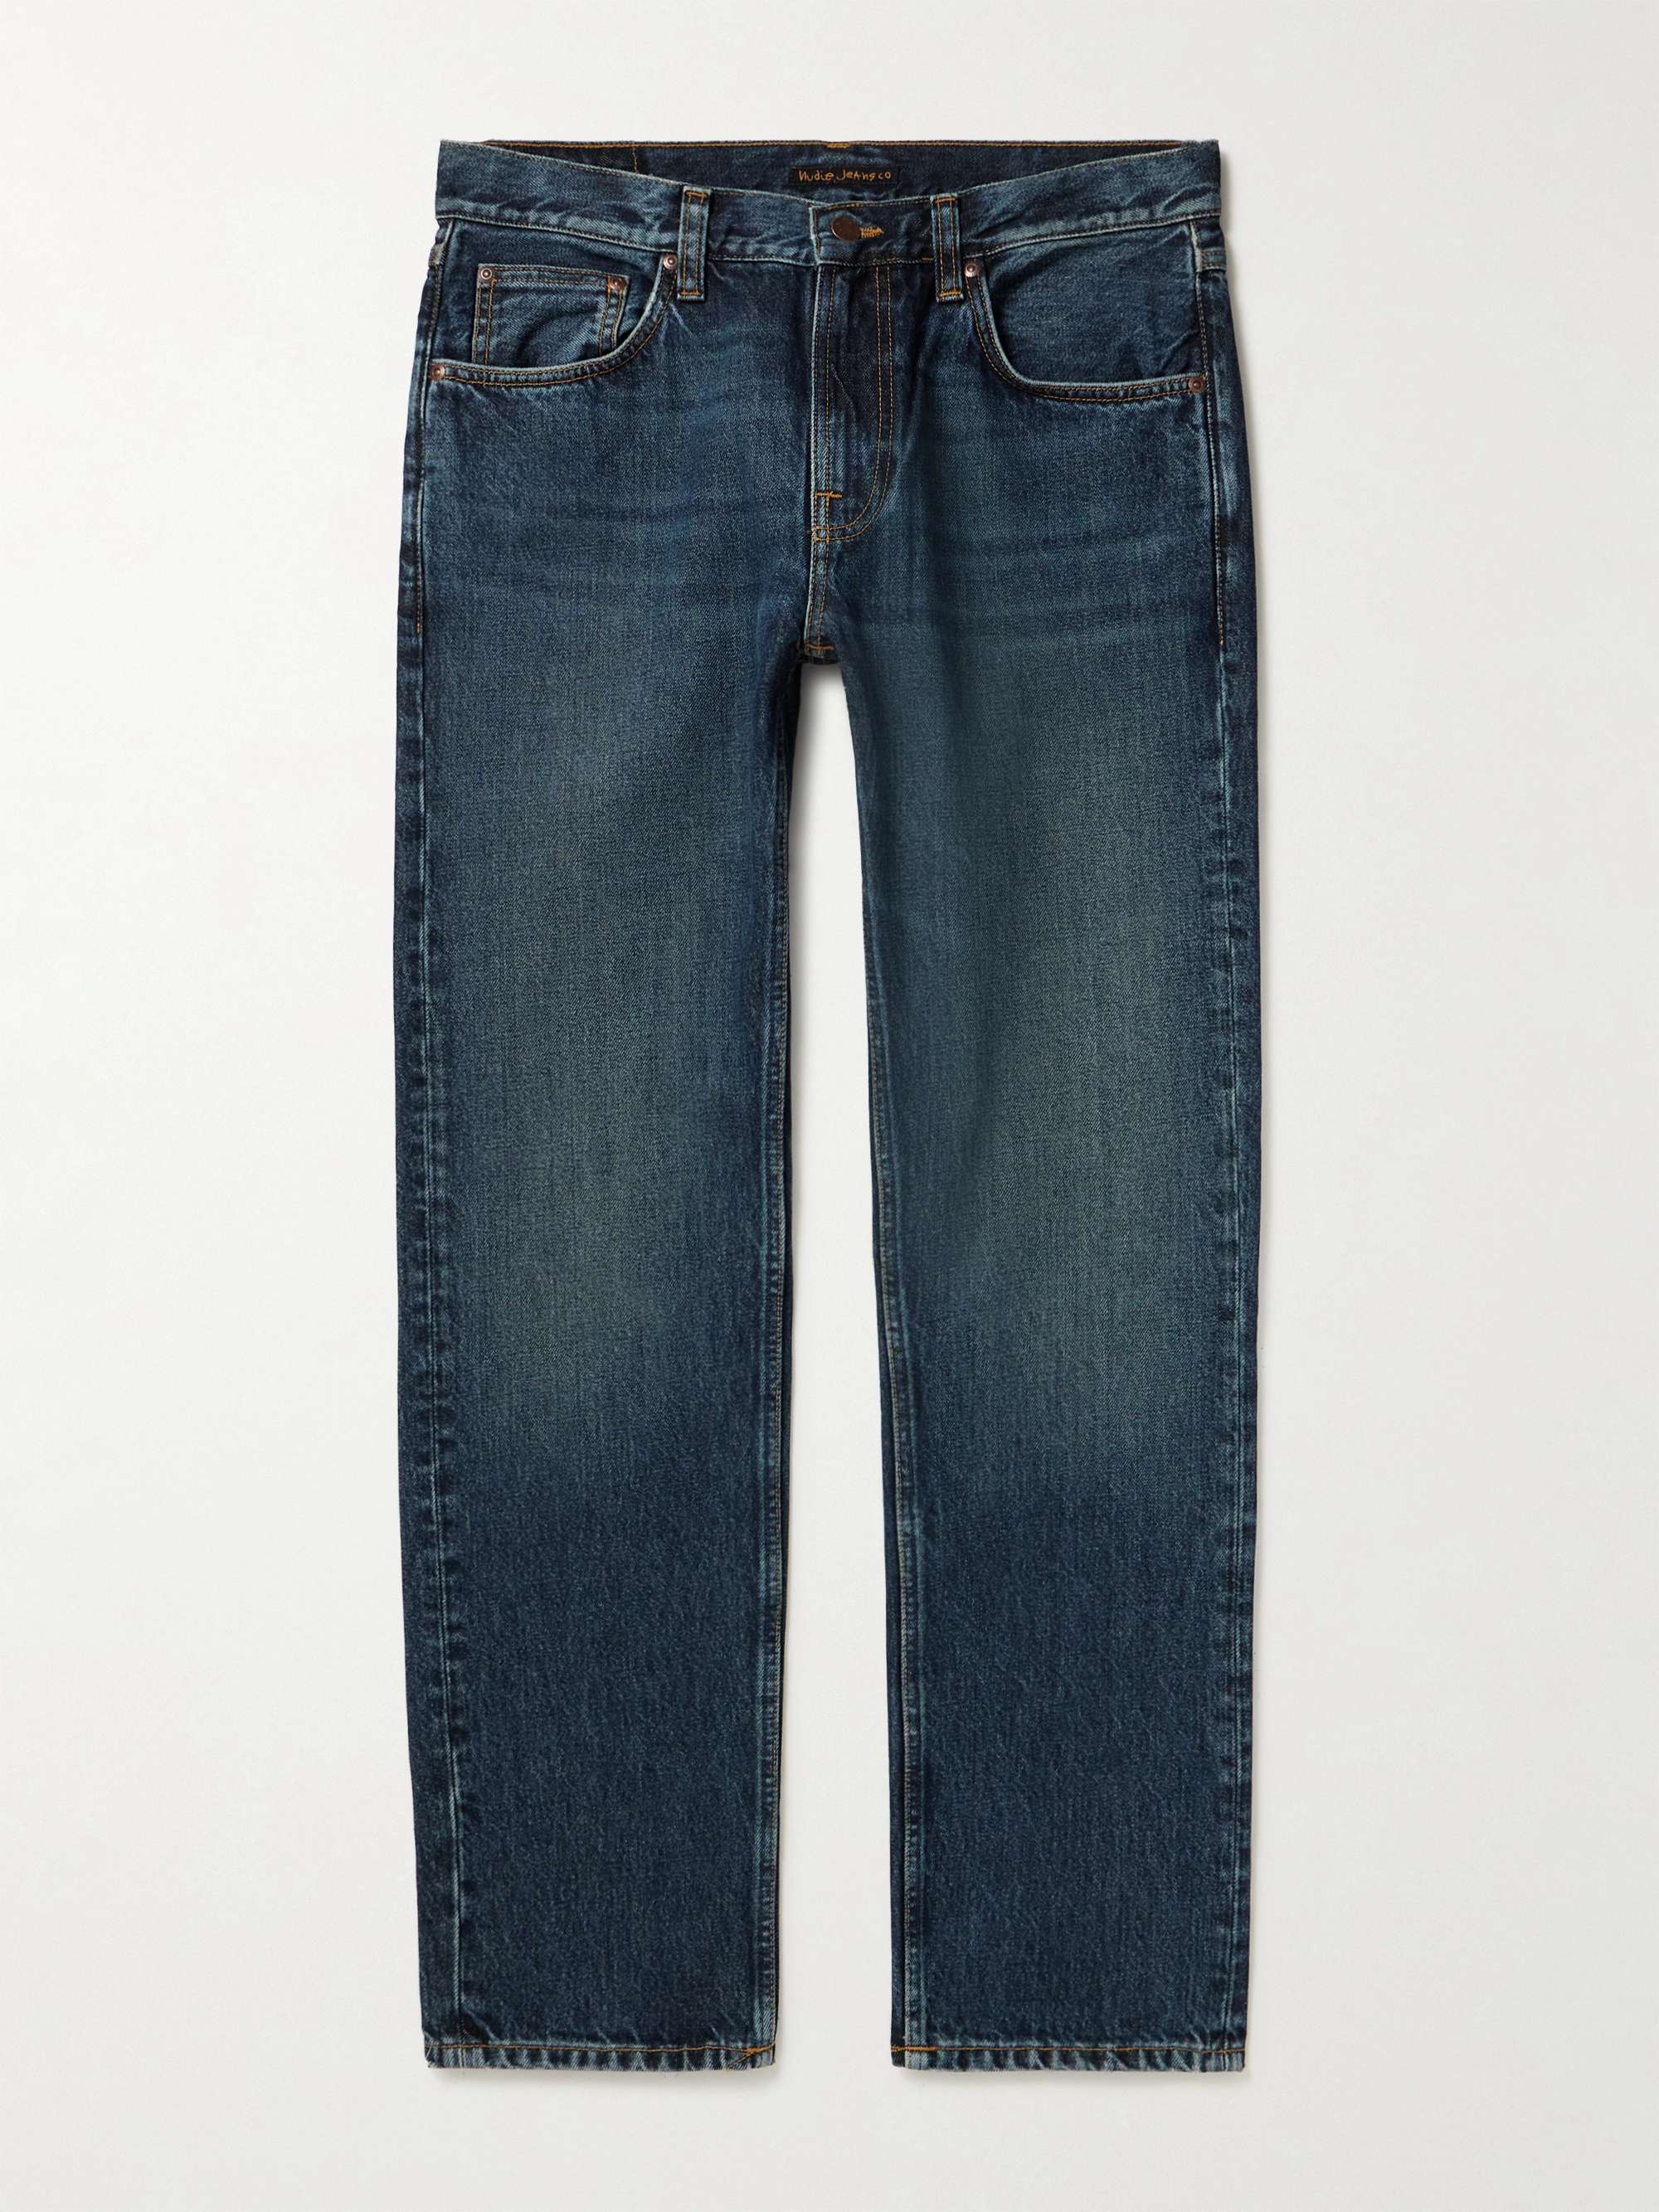 NUDIE JEANS Gritty Jackson Slim-Fit Straight-Leg Jeans for Men | MR PORTER